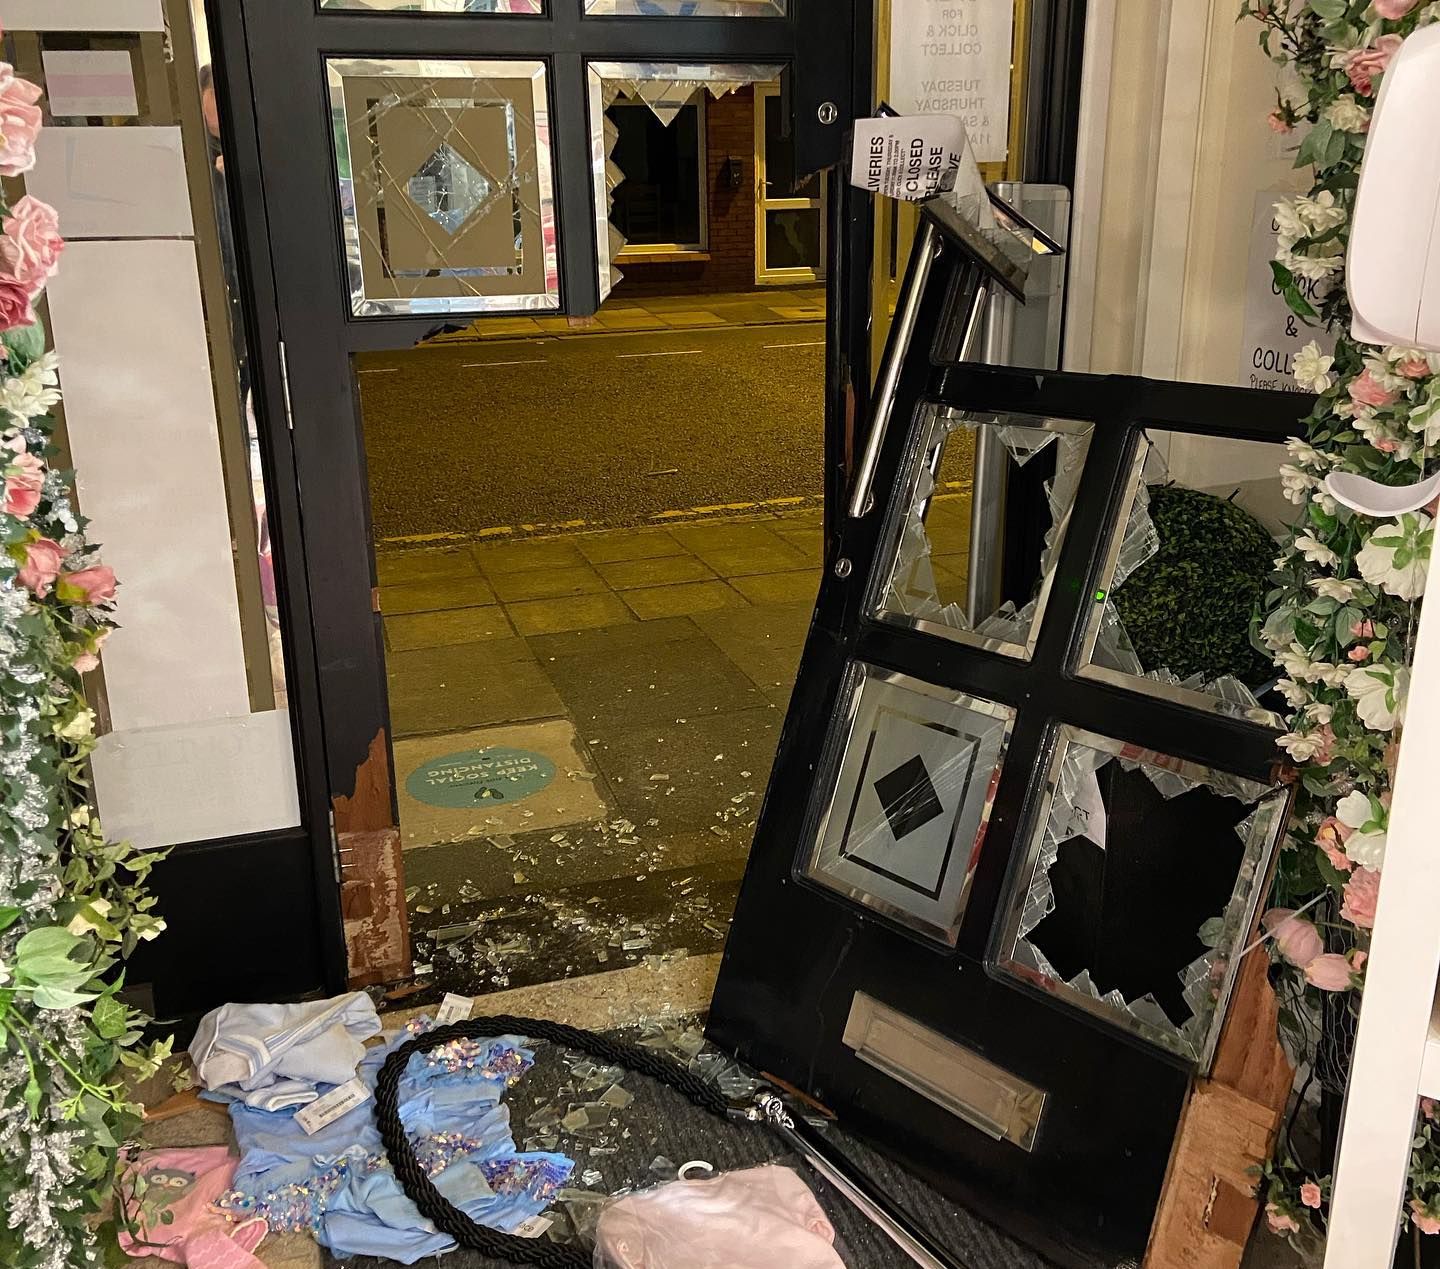 Burglars broke into the Over The Moon Kids Boutique in Southport